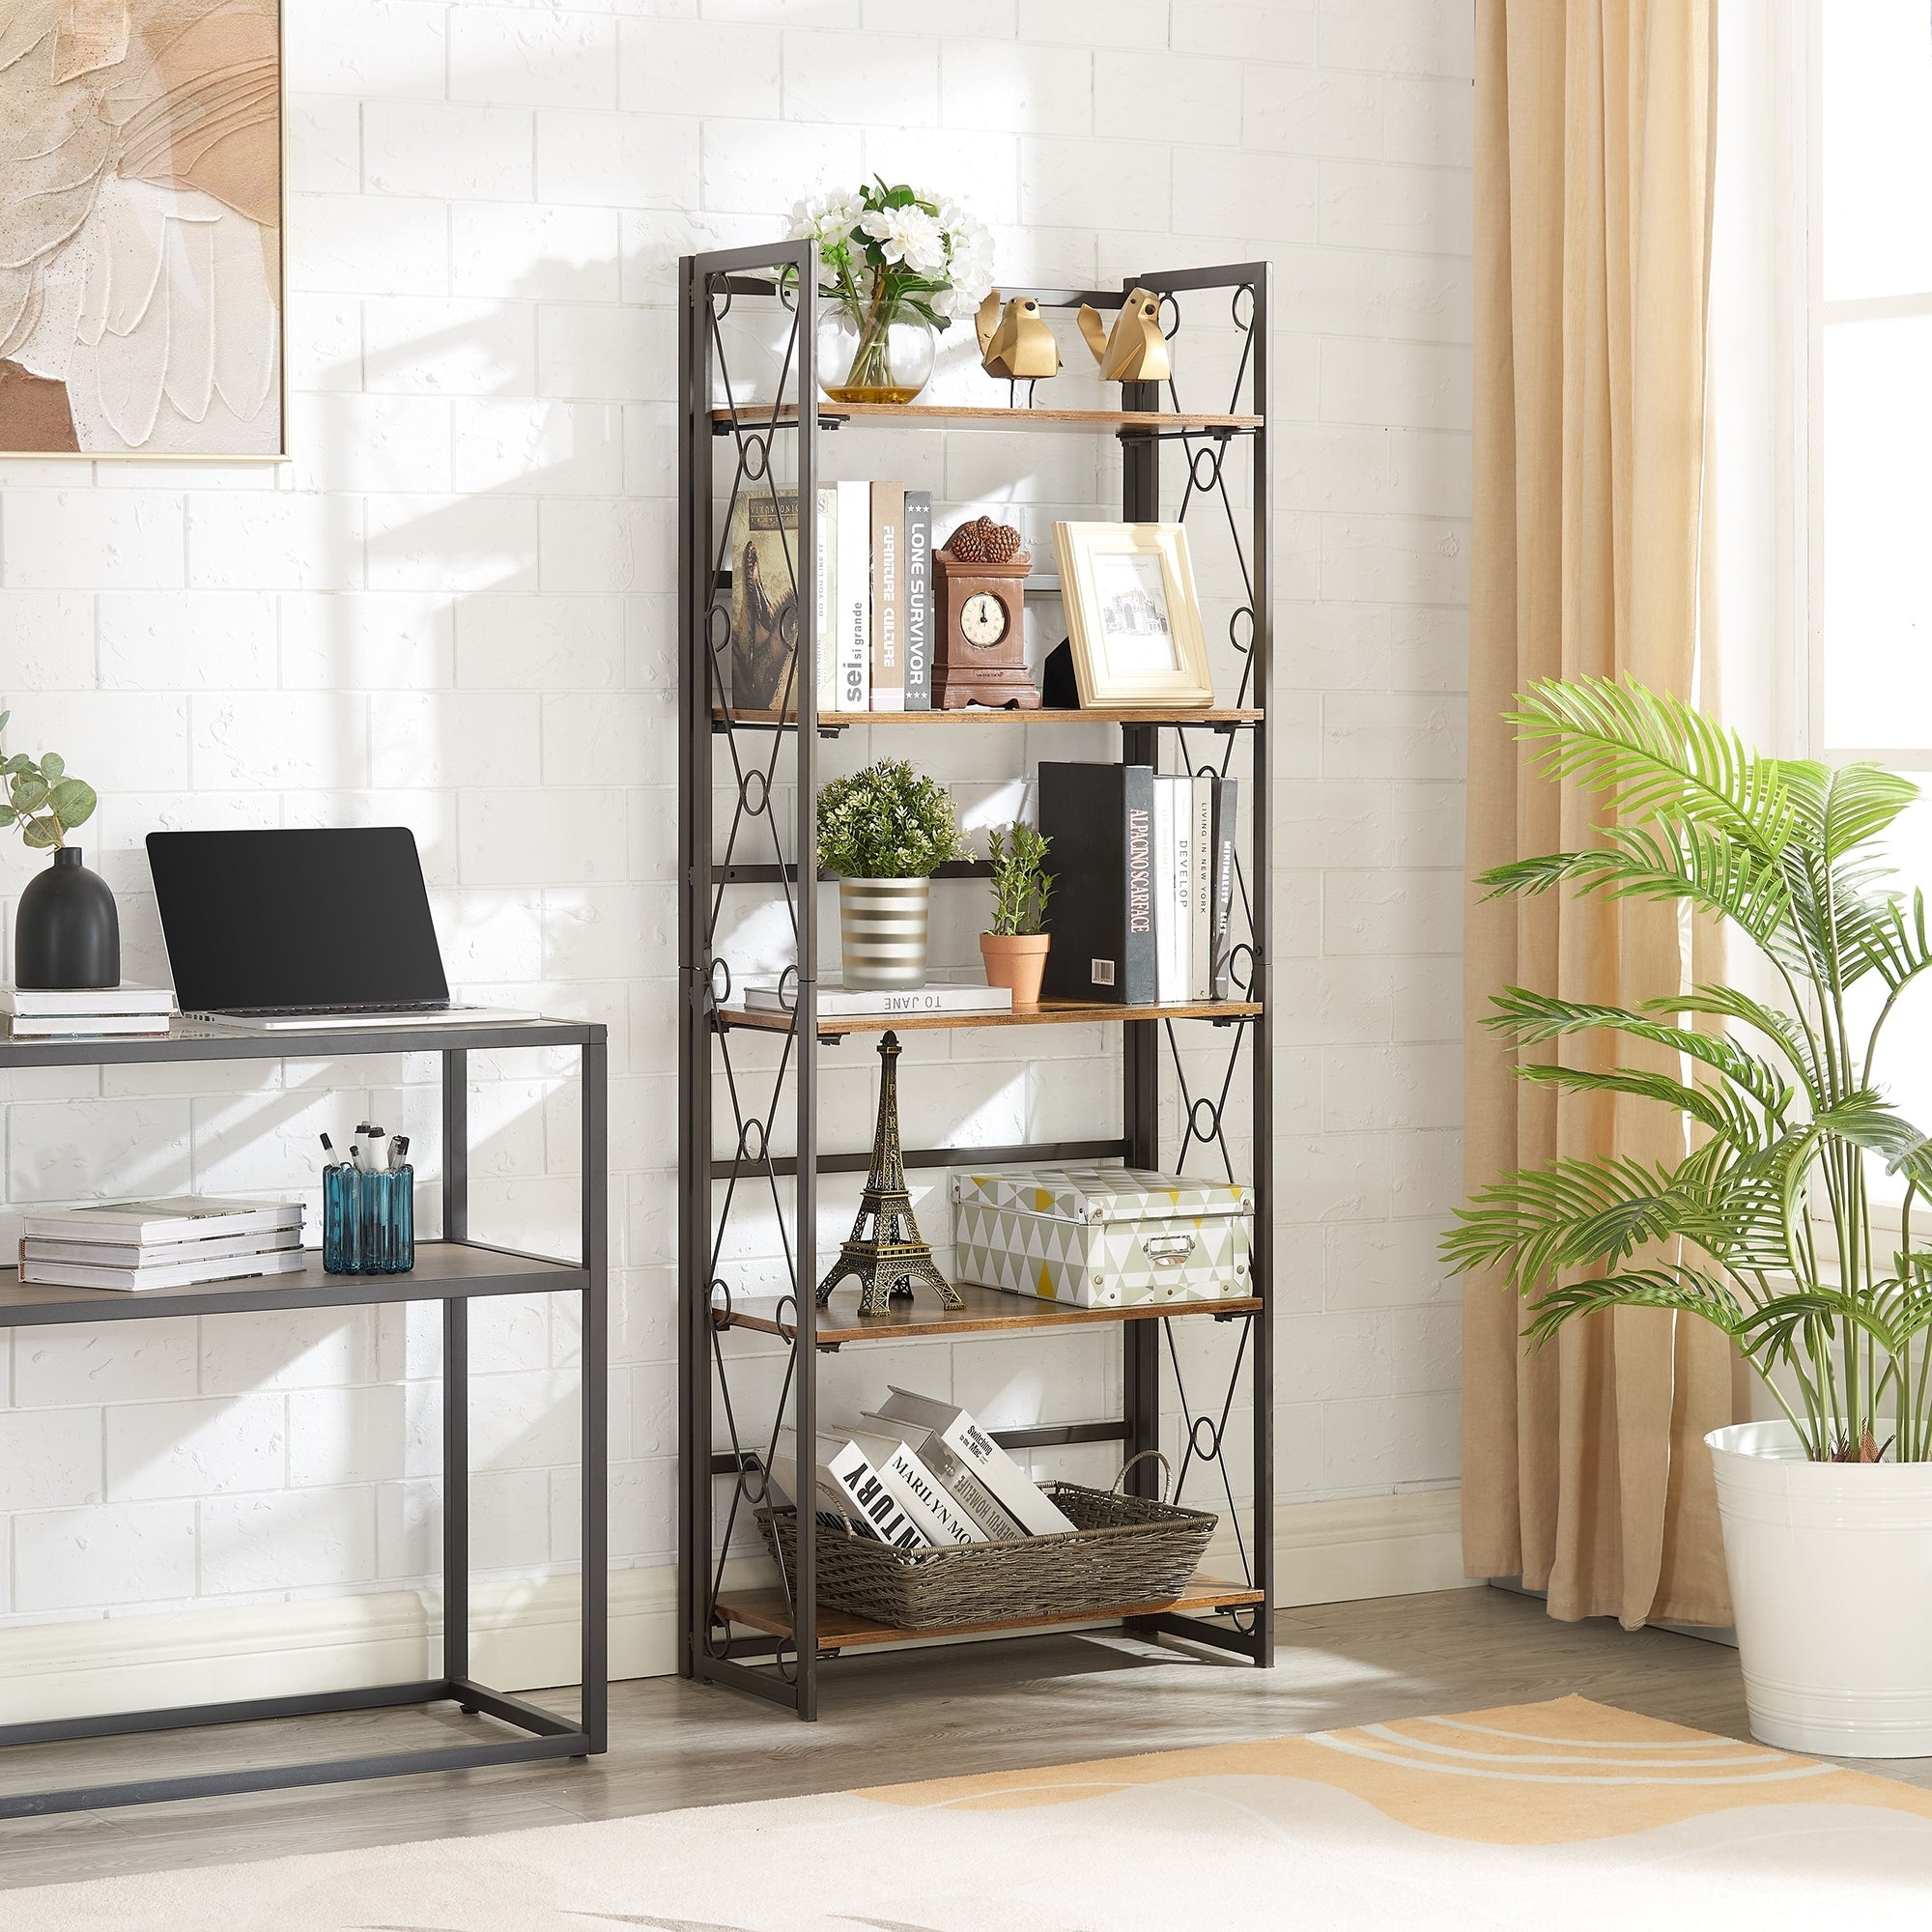 https://ak1.ostkcdn.com/images/products/is/images/direct/ea255edd5654932c53b20c3b4a19a7f44c04a1b2/Contemporary-5-Shelf-Display-Bookcase.jpg